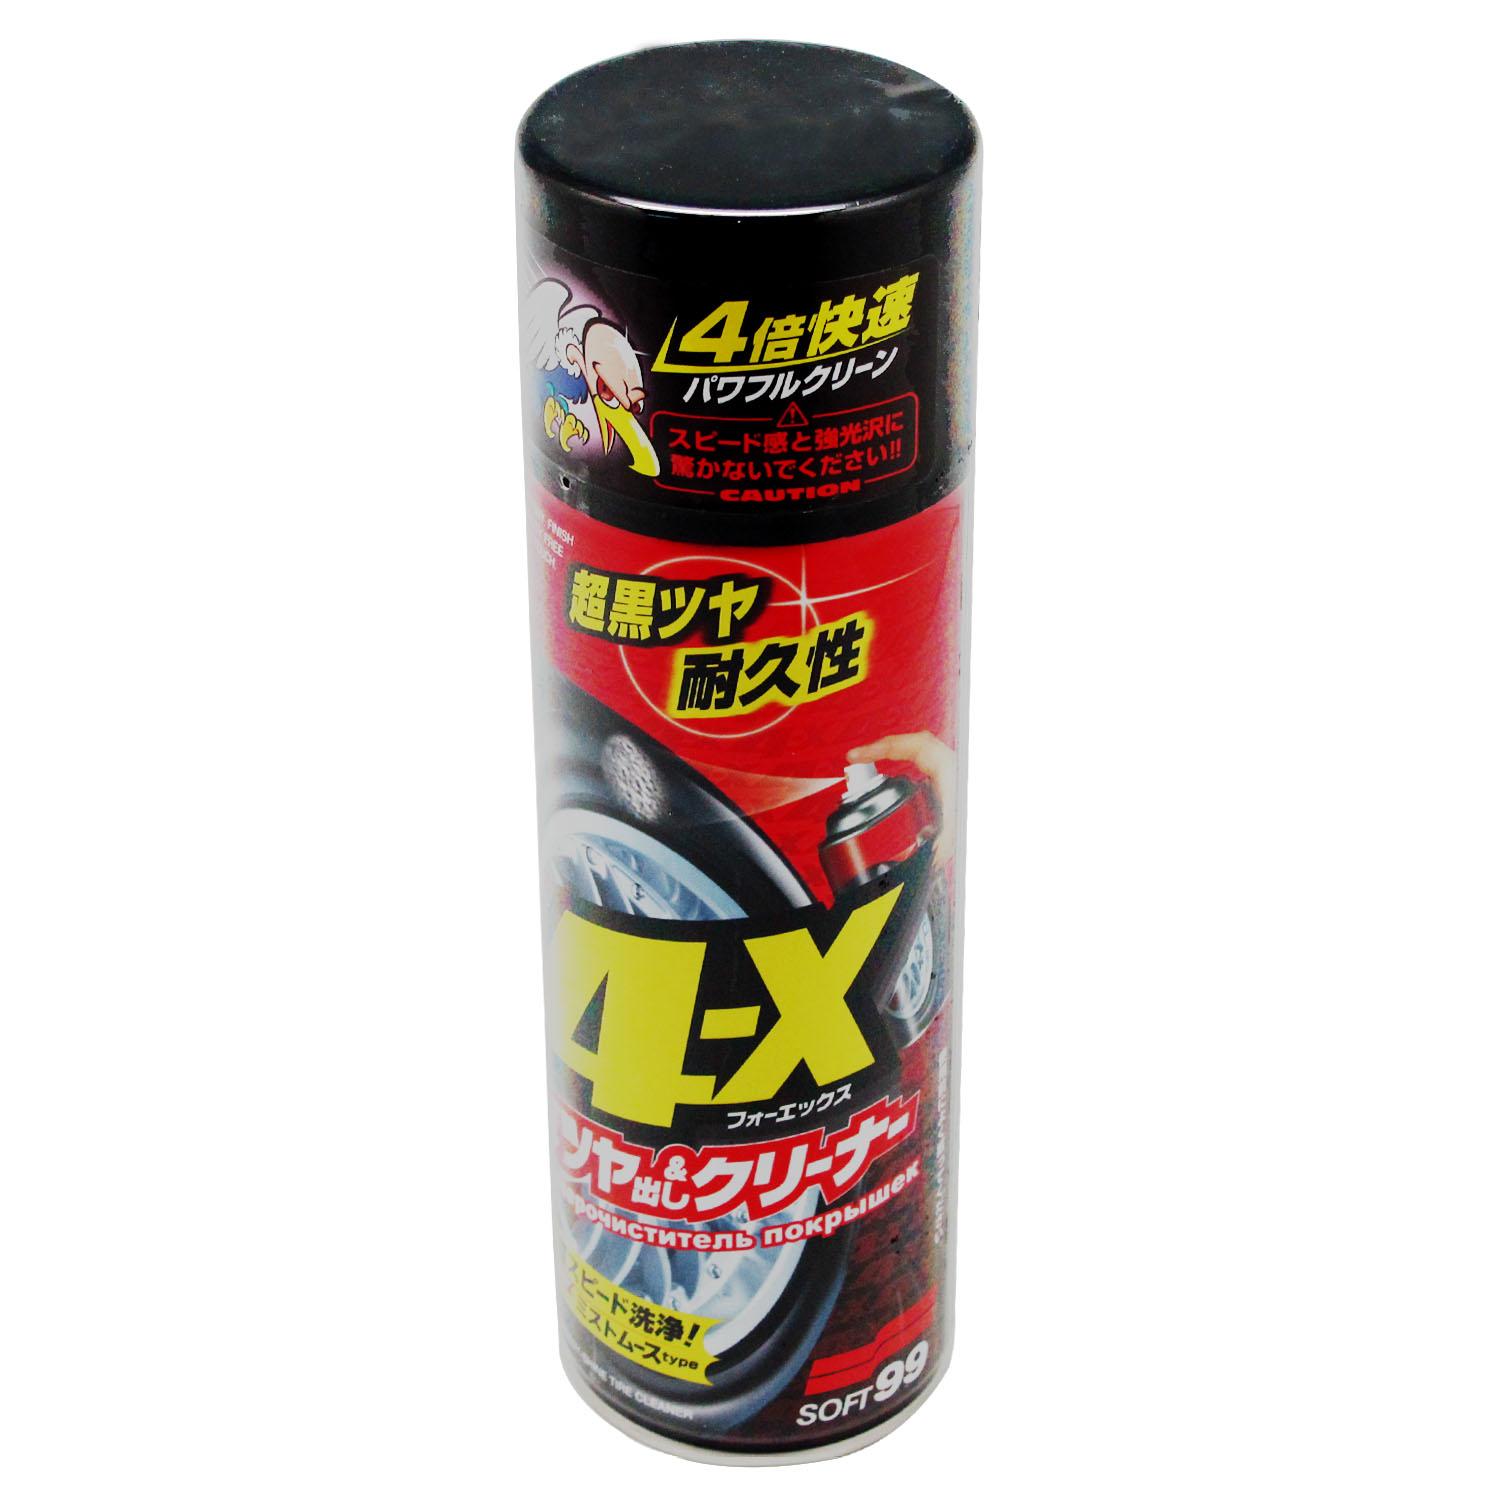 4-X Tire Cleaner, dressing for tyres, 470 ml - Soft99